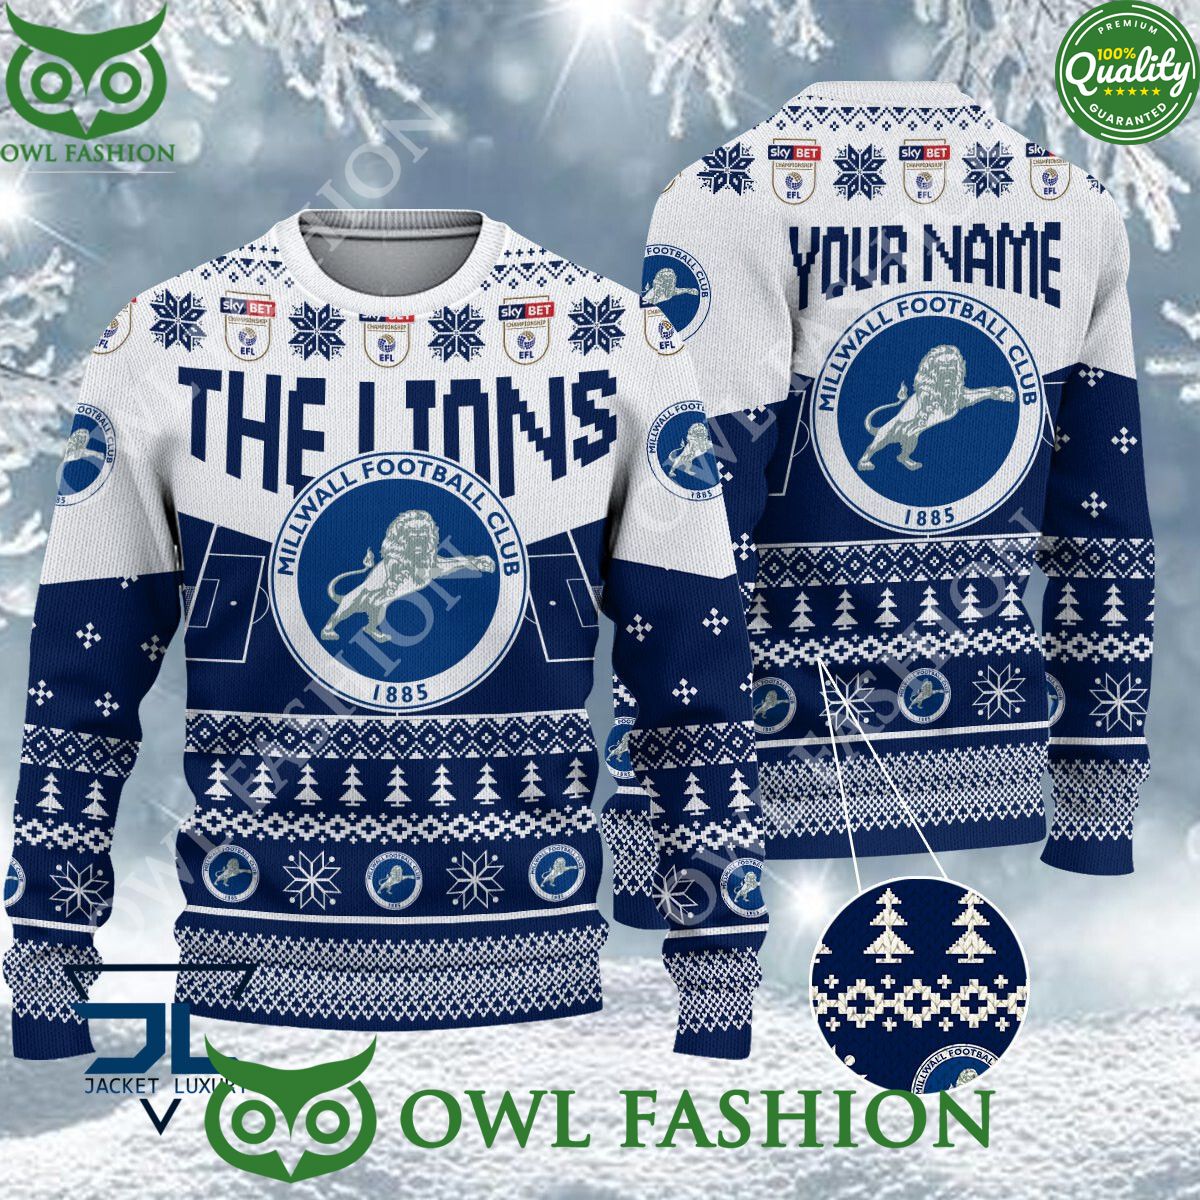 limited millwall f c efl design for fans ugly sweater jumper 1 ilOTY.jpg